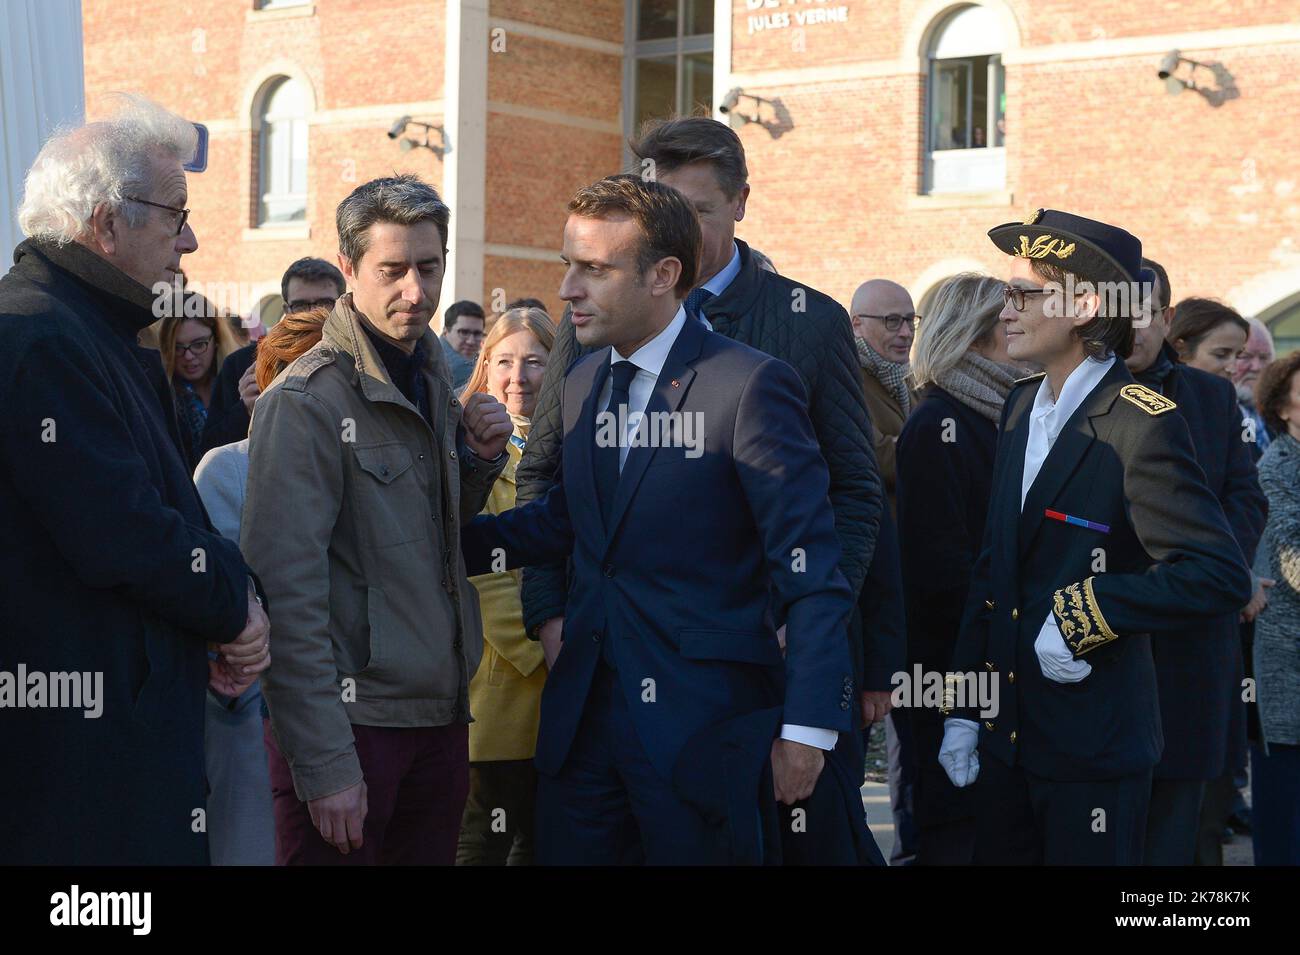 Arrival of the French President Emmanuel Macron at the new university pole of the University Jules Verne, located in the heart of the Citadel of Amiens, listed building of the early seventeenth century redesigned by the architect Renzo Piano, and meeting with the students outside and Gabriel Attal, Frederique Vidal. Then presentation of the HUB energy - Tiamat start up and GRECO innovation by Professor of the universities M. Le Franc - surgery assisted by robots, and meeting with the students of the University, on November 21, 2019 in Amiens.  Stock Photo